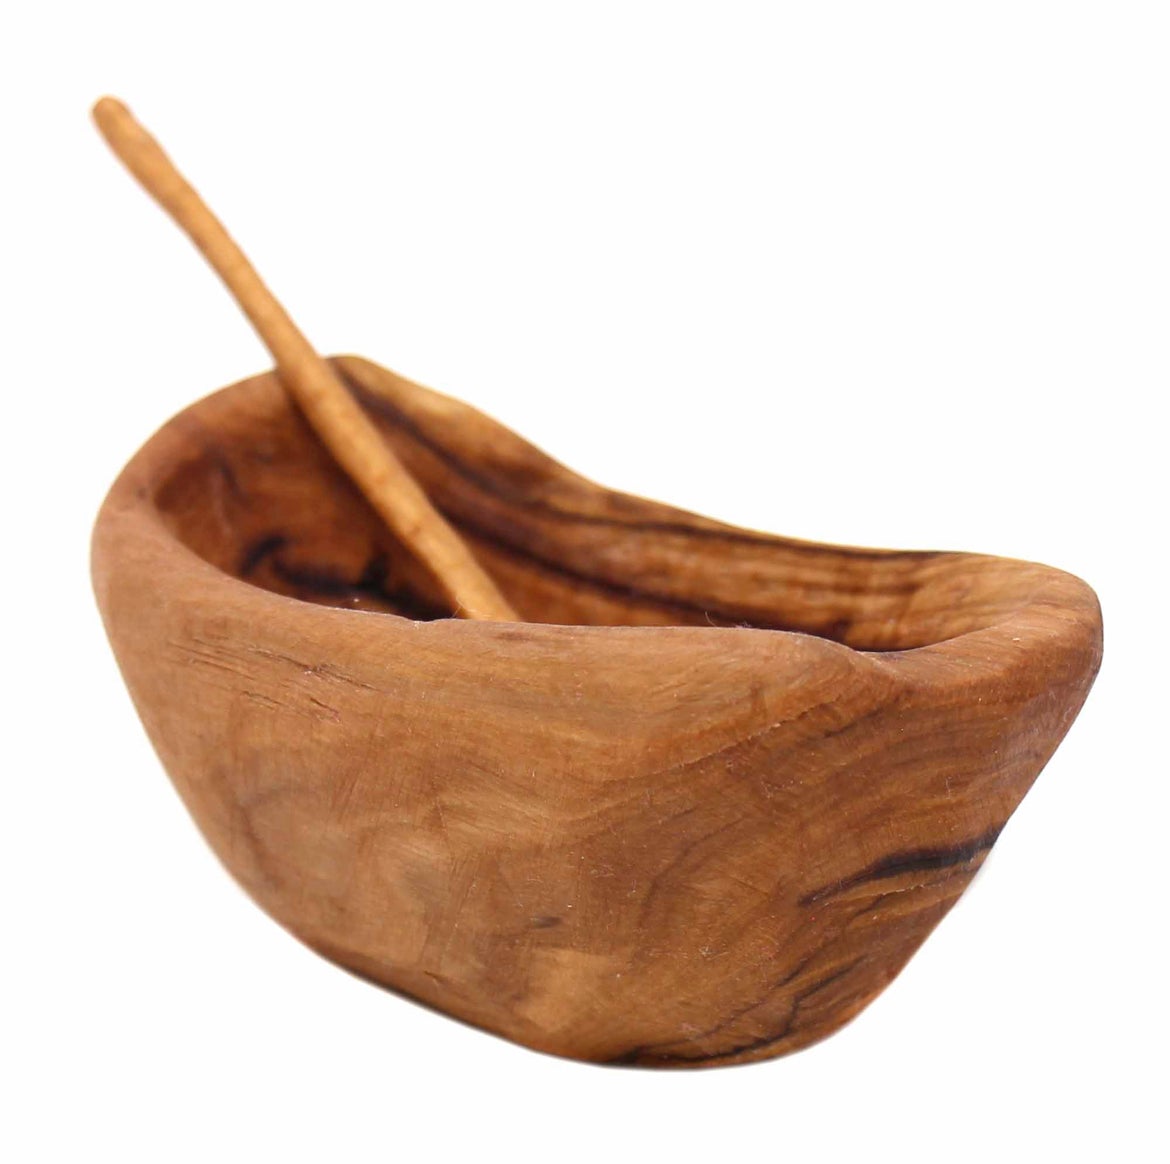 Wooden play bowl, Olive Wood Pretend Doll or Play Kitchen Bowl